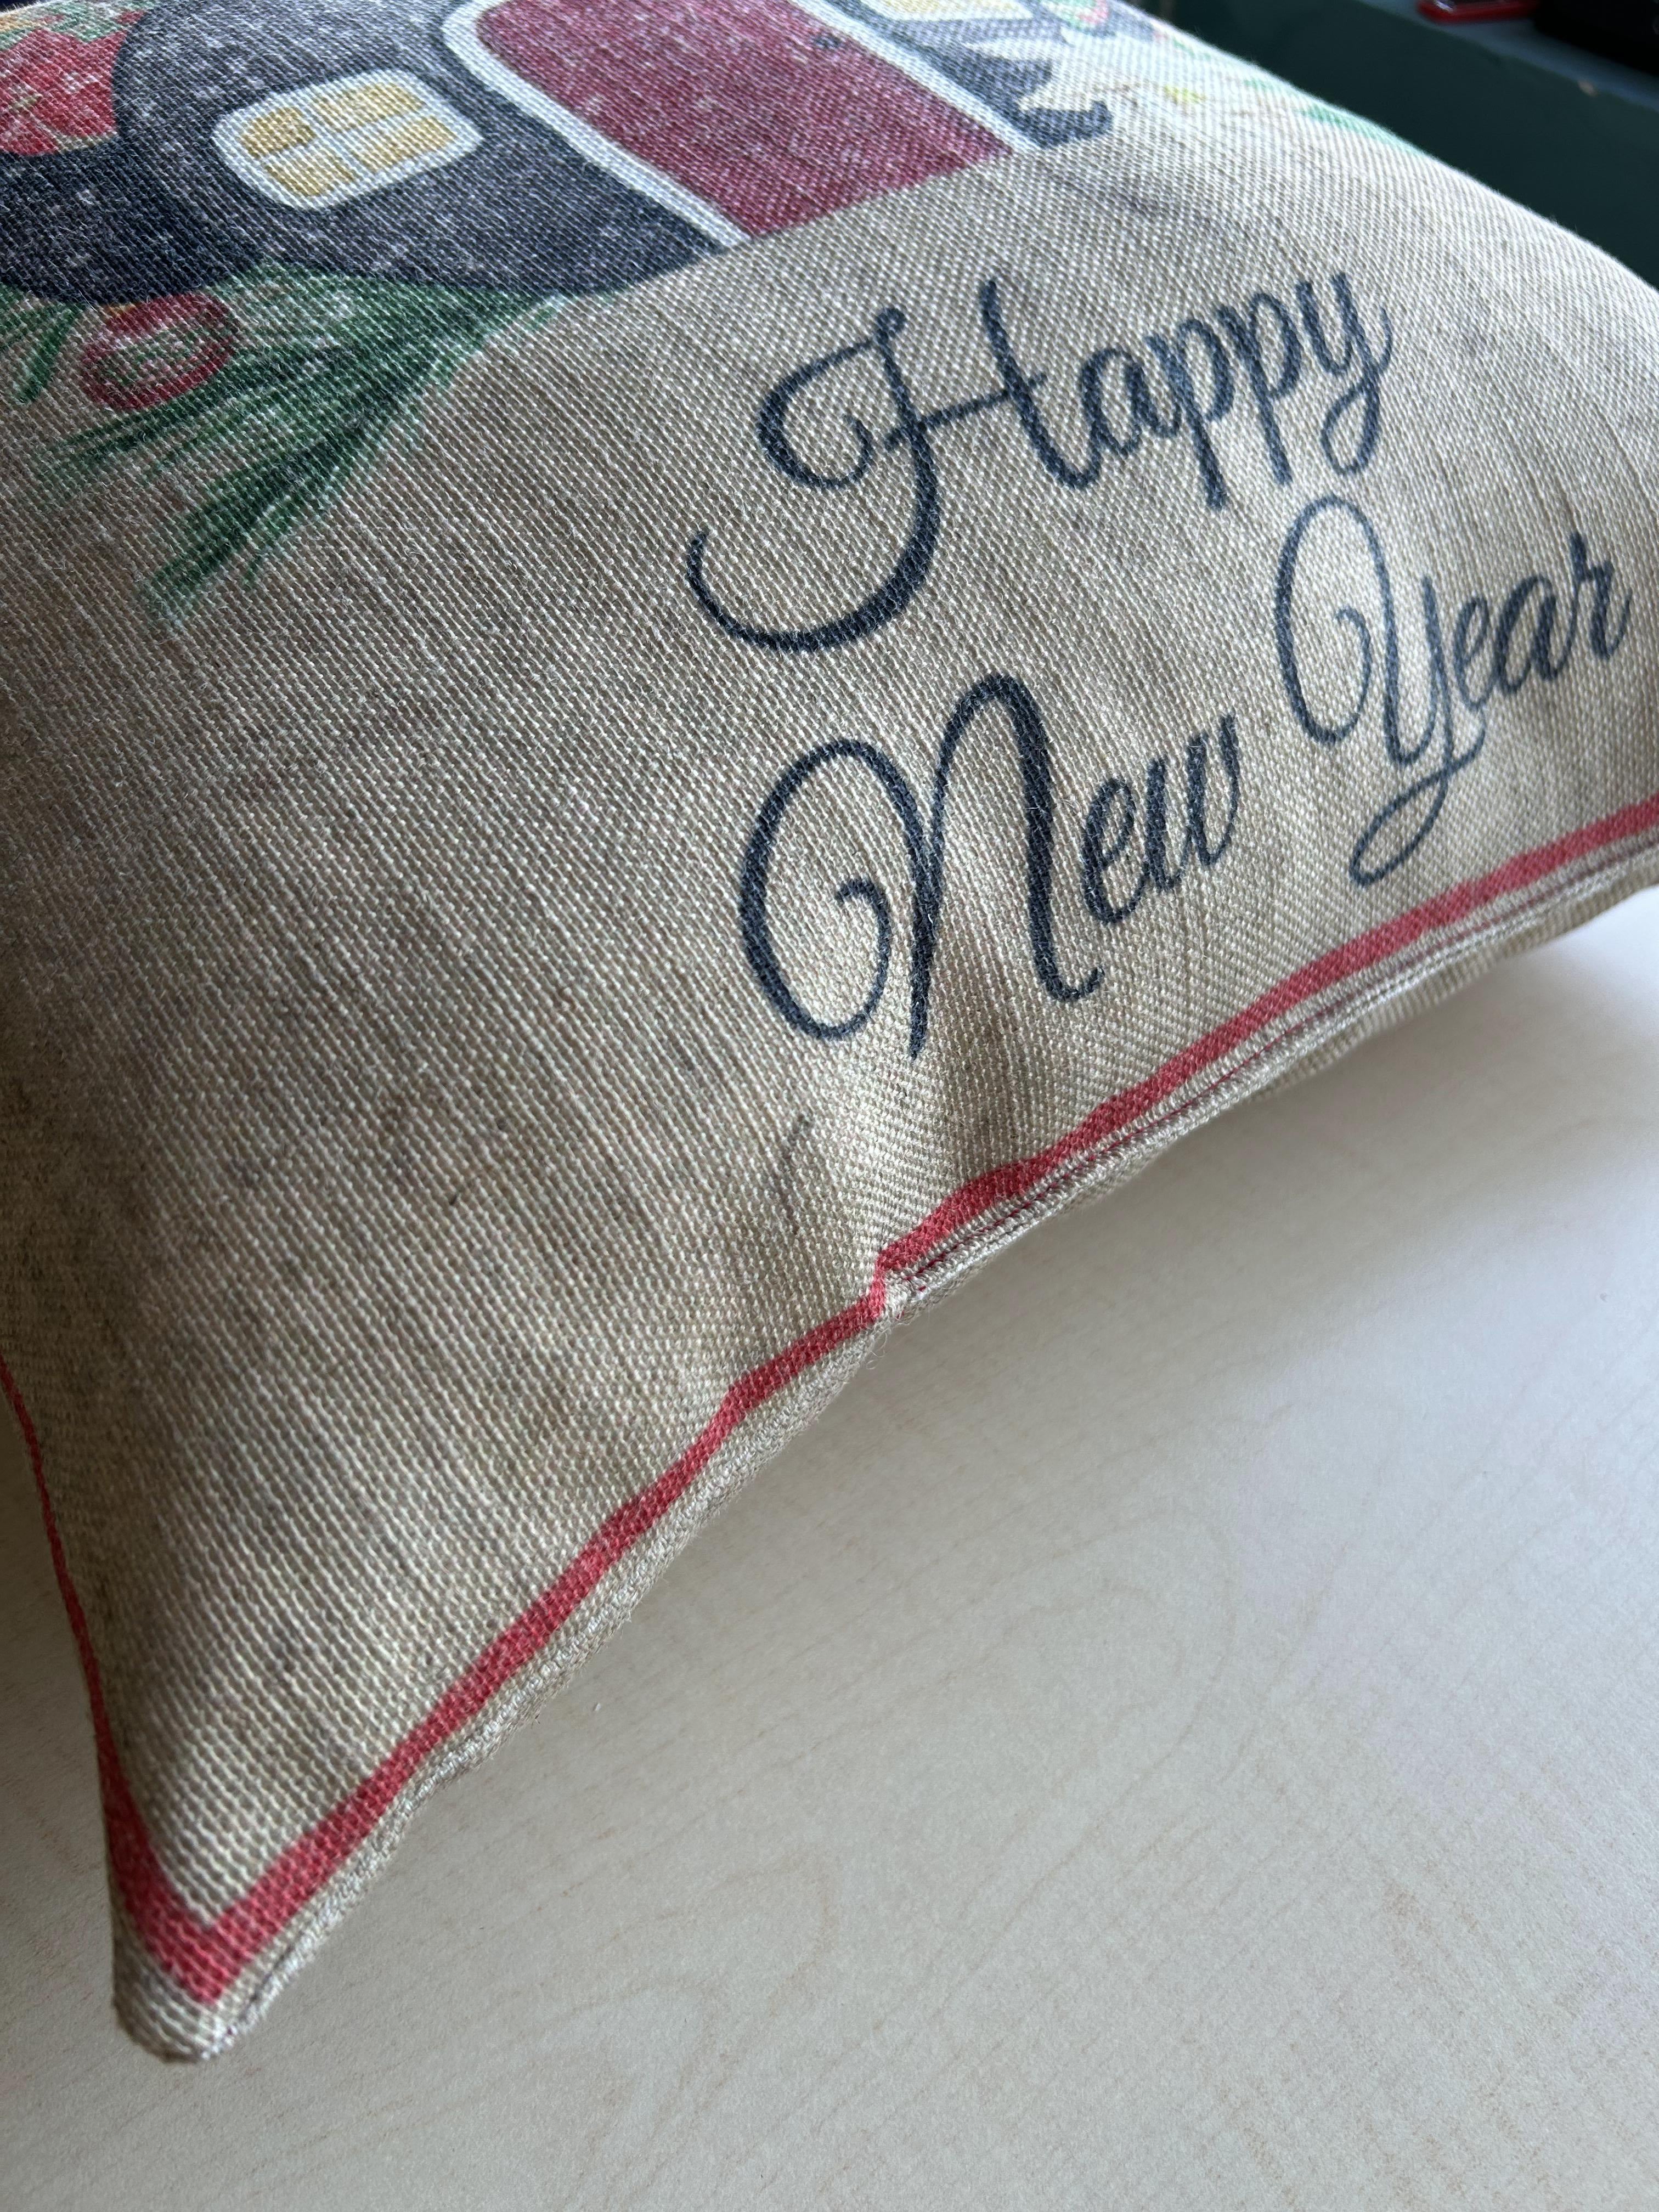 New Year Themed Pillow Cover, Holiday, Decorating, Square, 16" x 16" - Wear Sierra